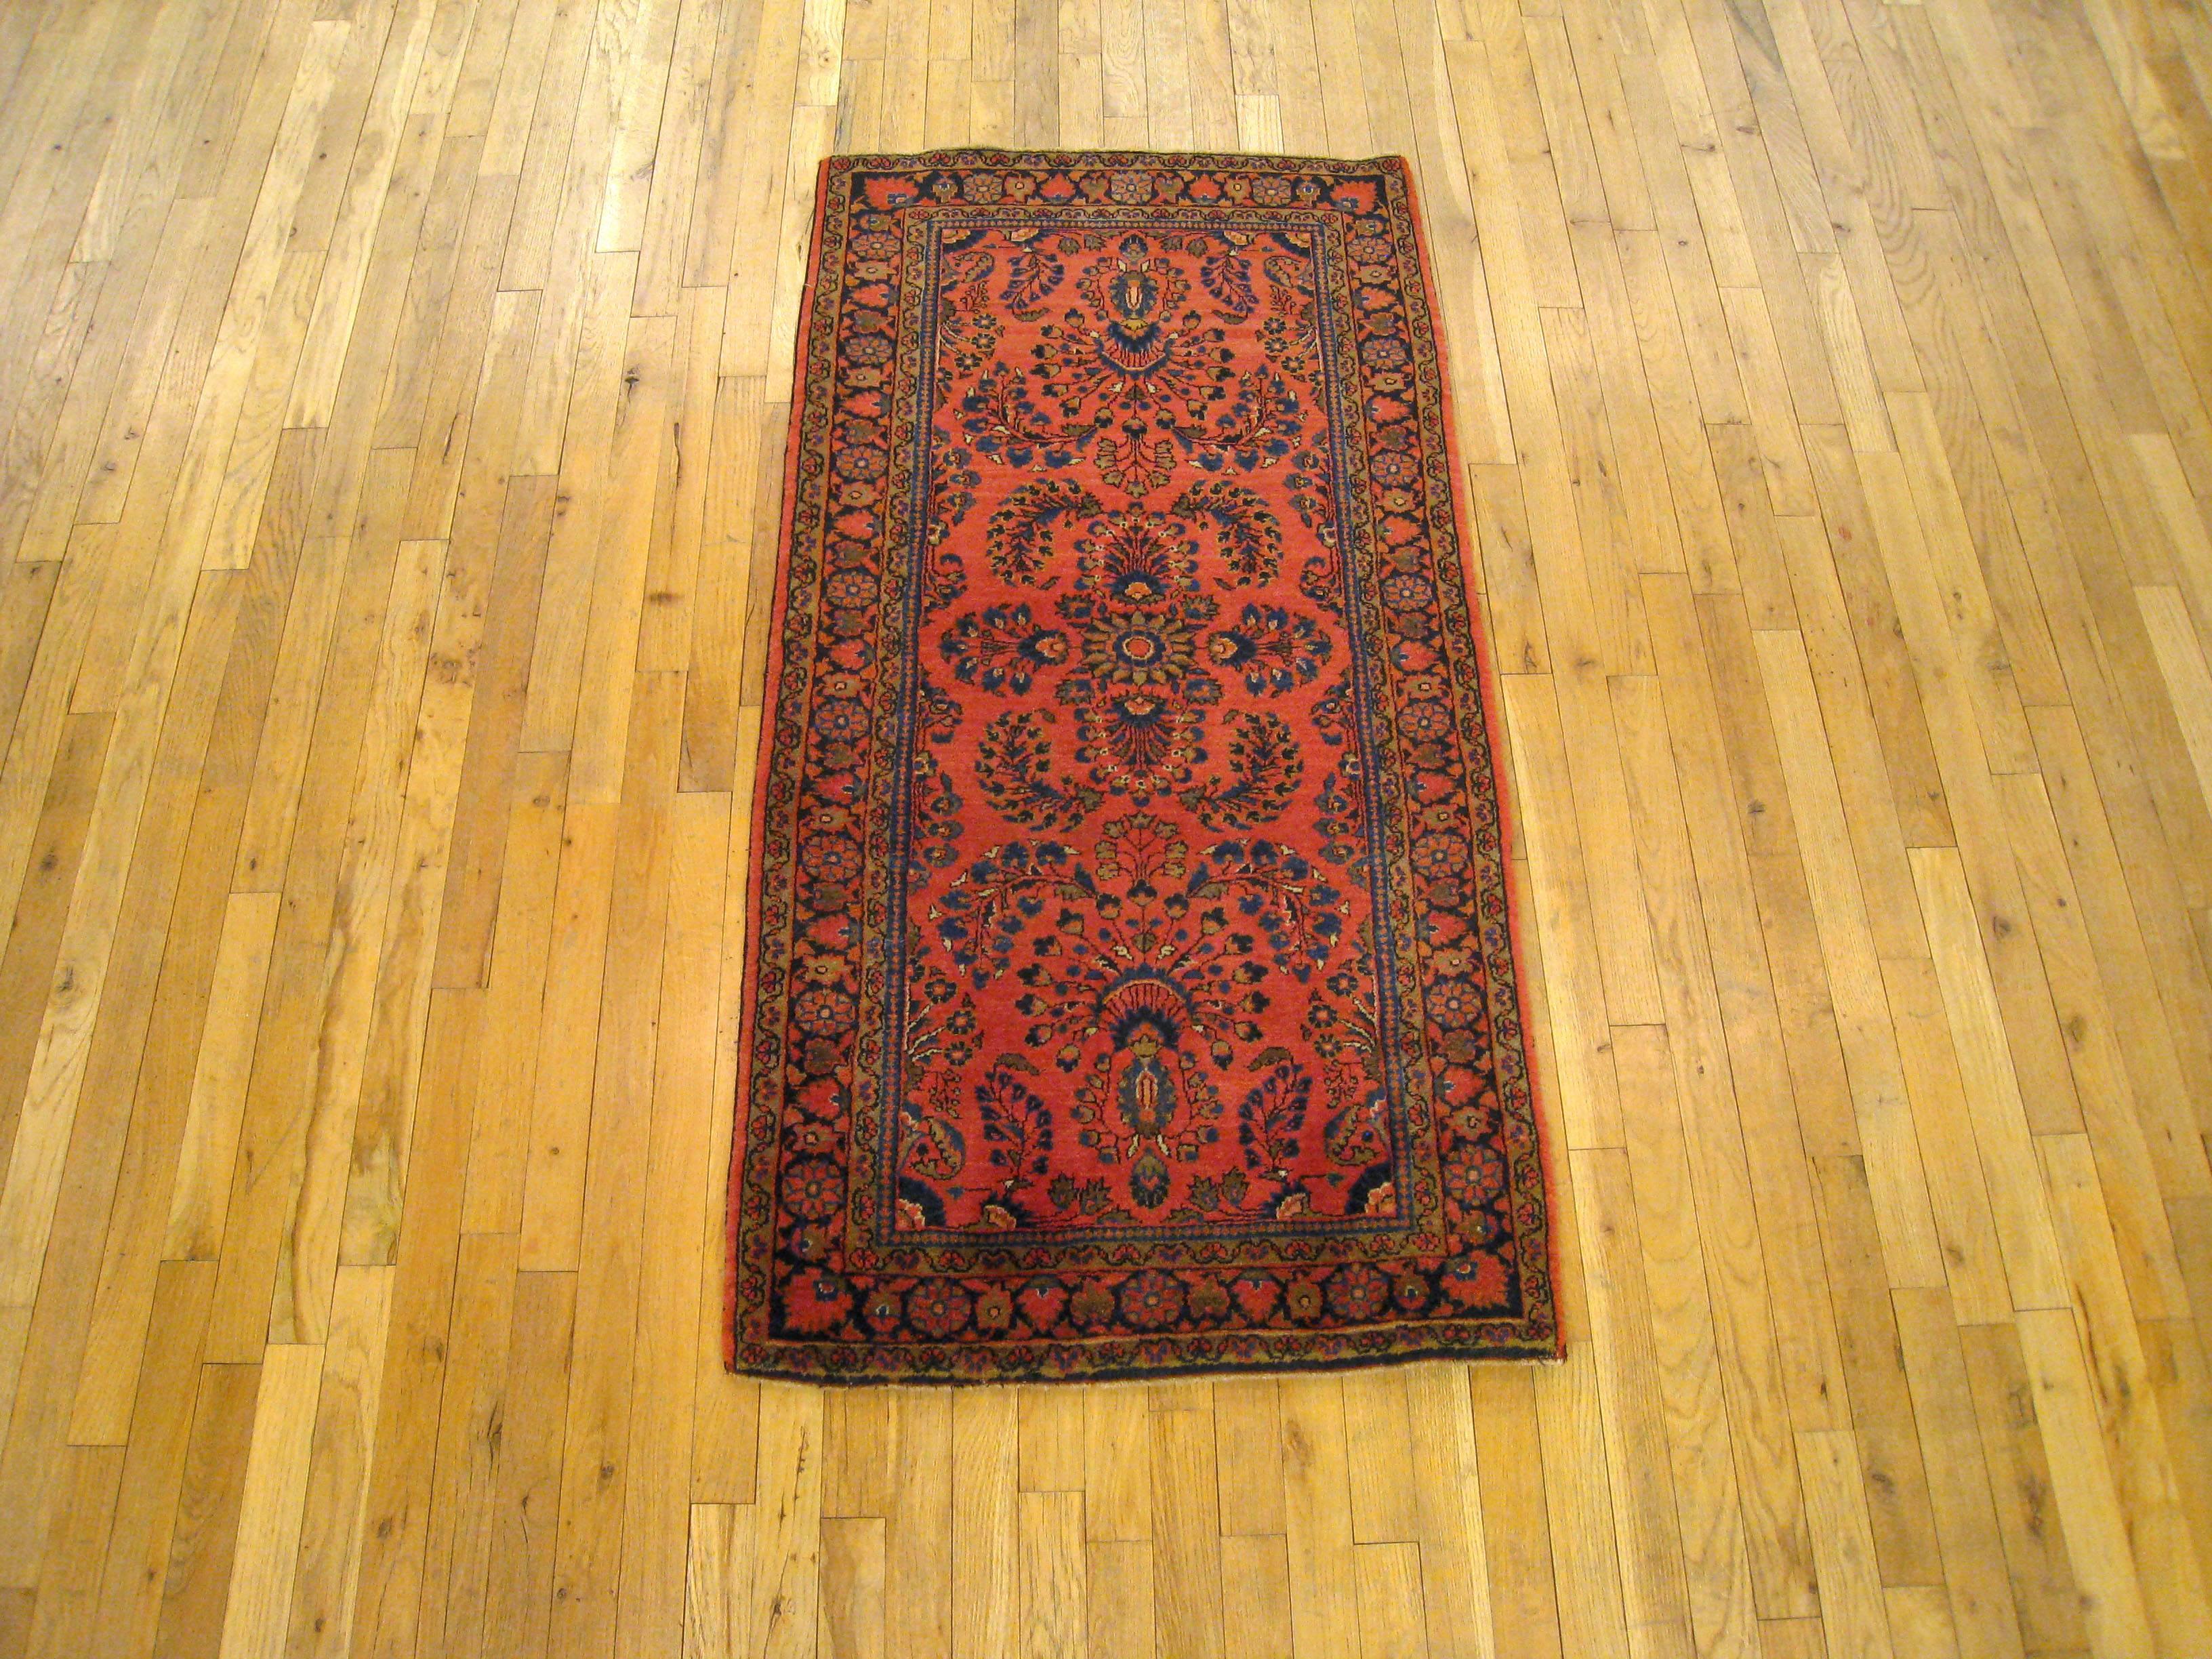 An antique Persian Sarouk oriental rug, size 5'0 x 2'6, circa 1920. This lovely hand-knotted Persian rug features a stylish floral design in the soft red central field, which is accentuated by the blue outer border with flower head design. Composed